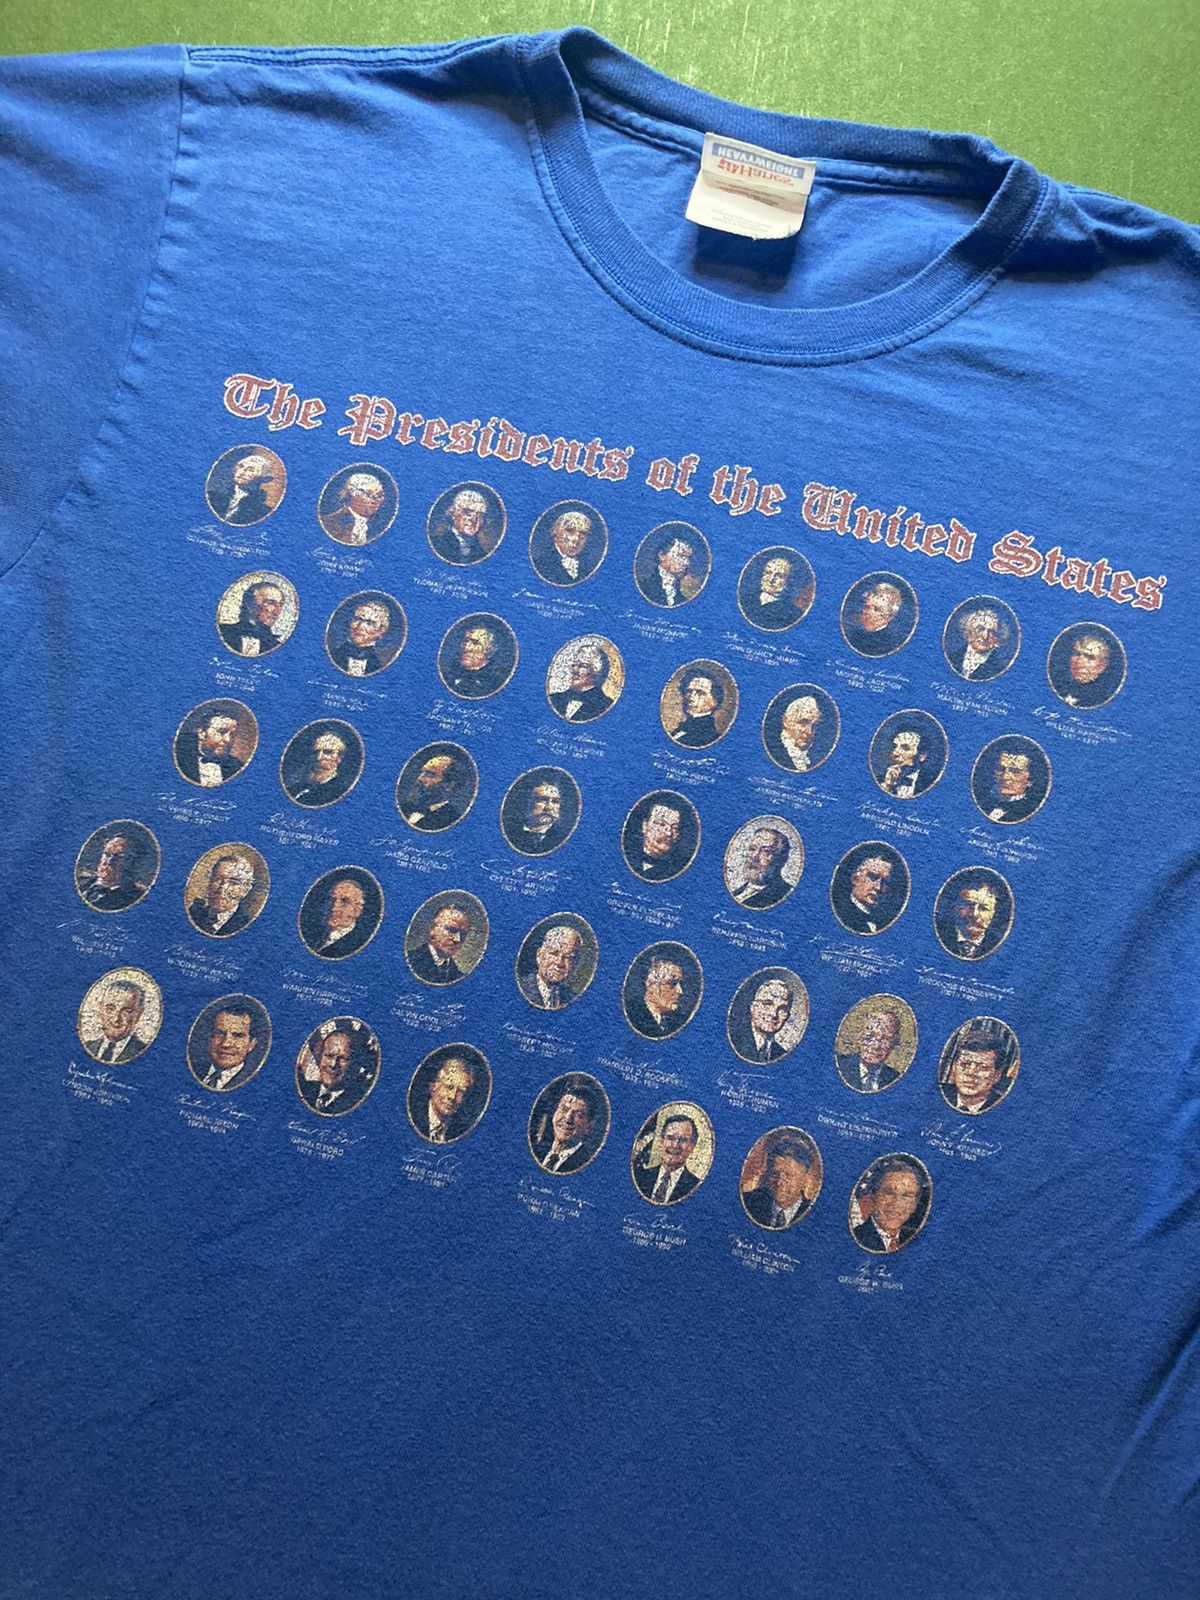 Vintage 90s Presidents of the United States of America Tee Size US S / EU 44-46 / 1 - 1 Preview